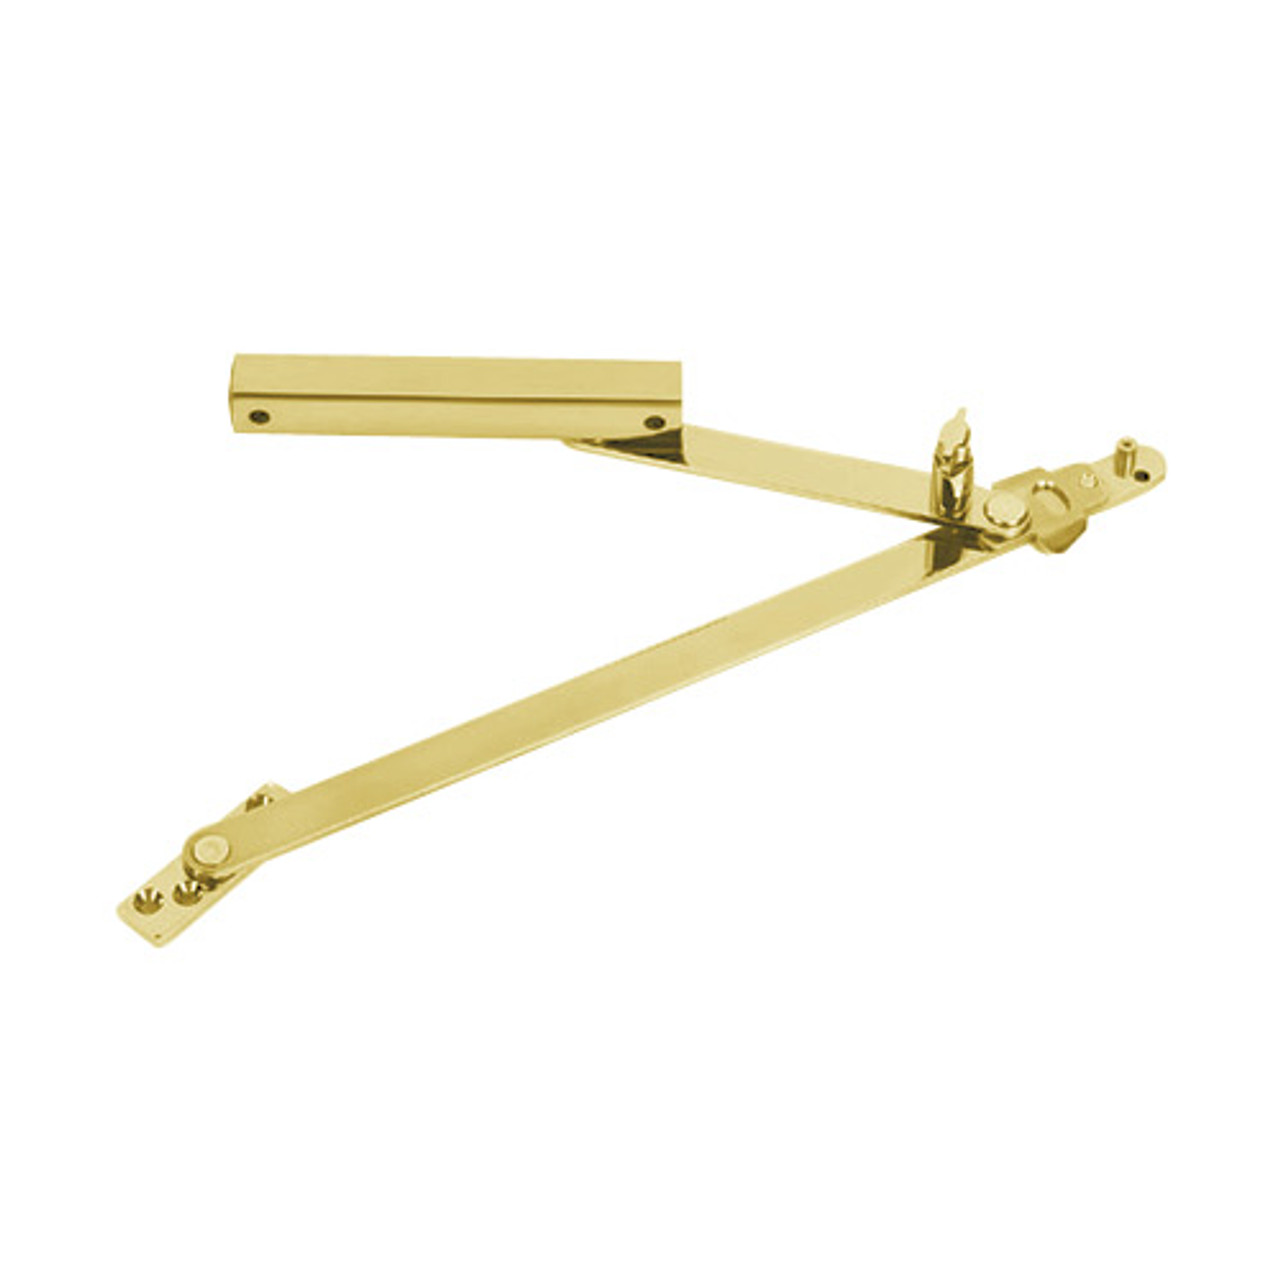 814S-US4-SHIM-1 Glynn Johnson 81 Series Heavy Duty Surface Overhead Stop Only with 1/4" Shim for Blade Stop Mounting in Satin Brass